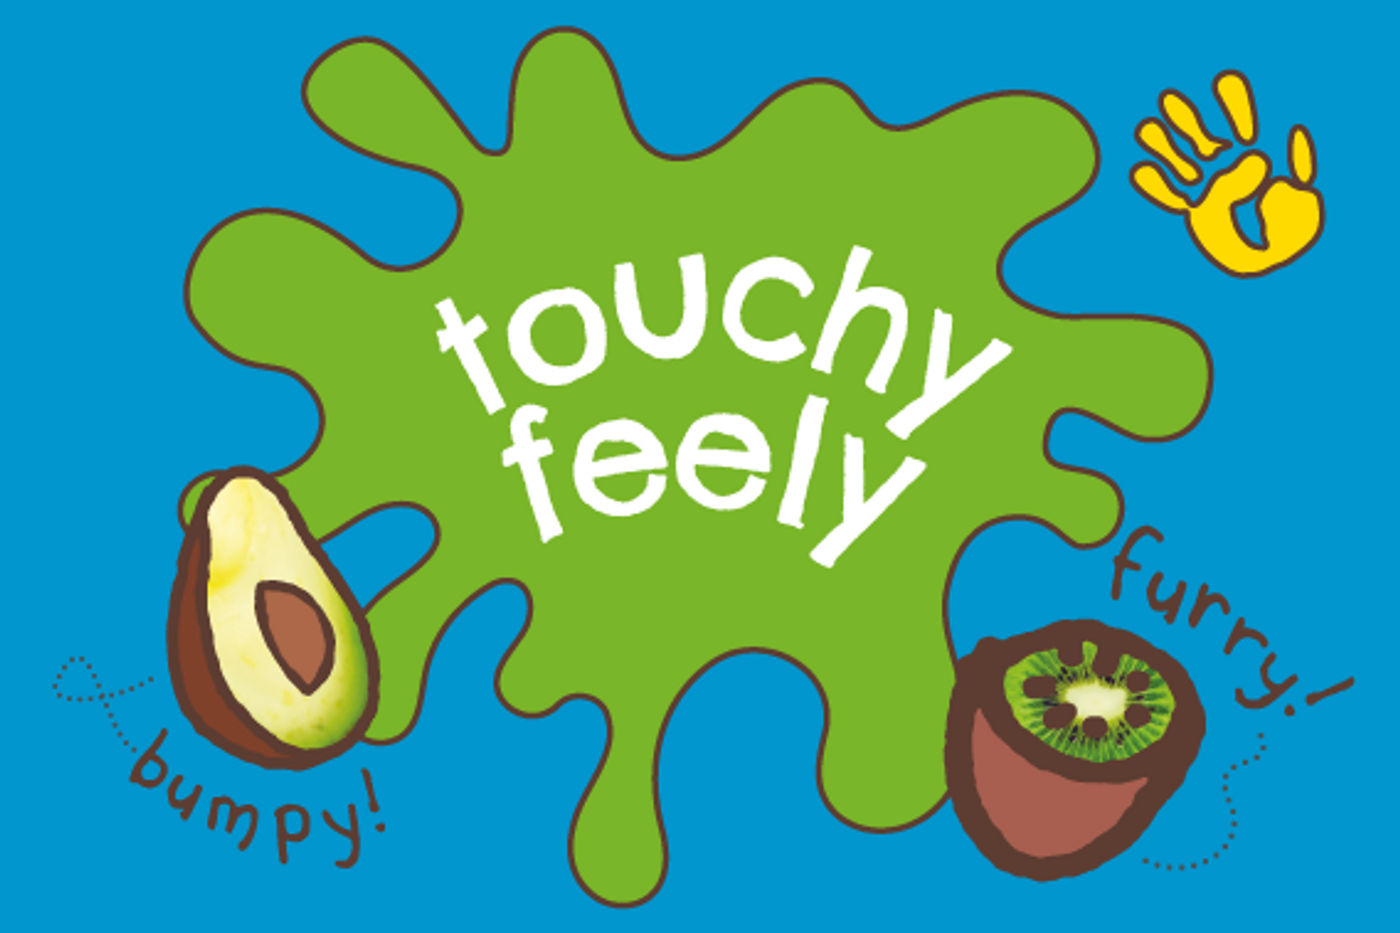 Touchy feely sensory play